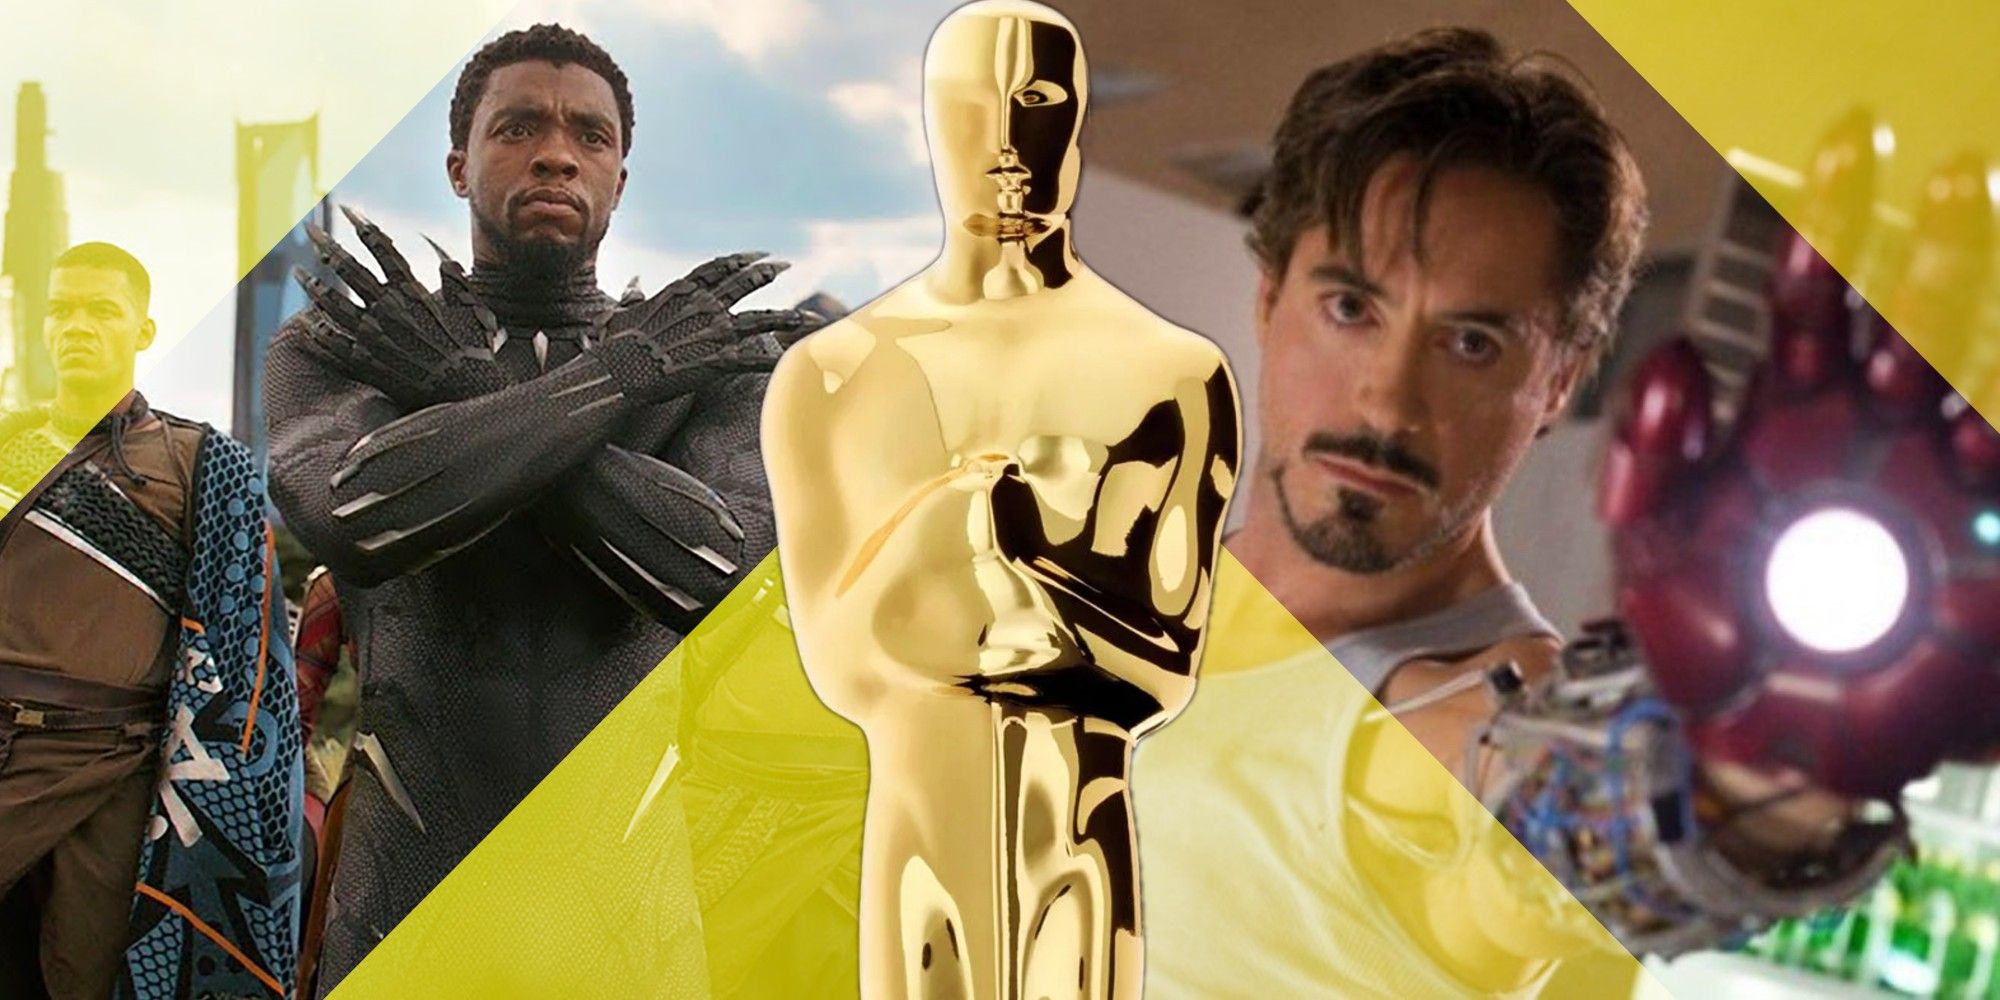 The Oscars Just Continued A Grim 14-Movie MCU Streak That Started With Iron Man